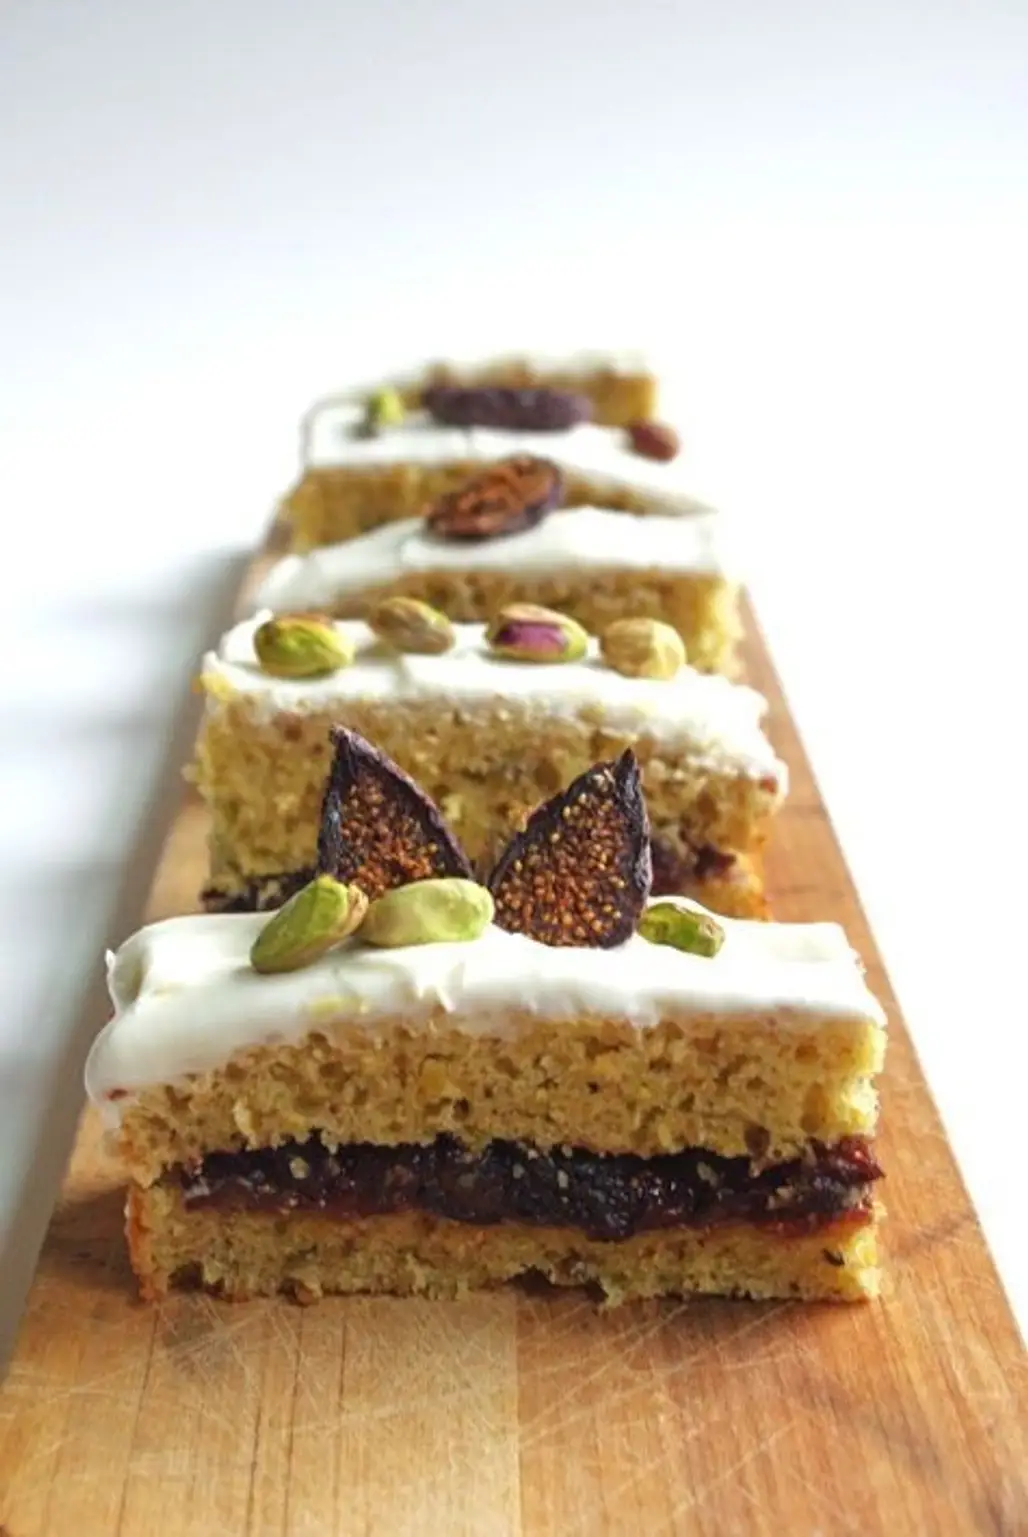 Pistachio Olive Oil Cake with Fig Compote Filling and Cream Cheese Frosting